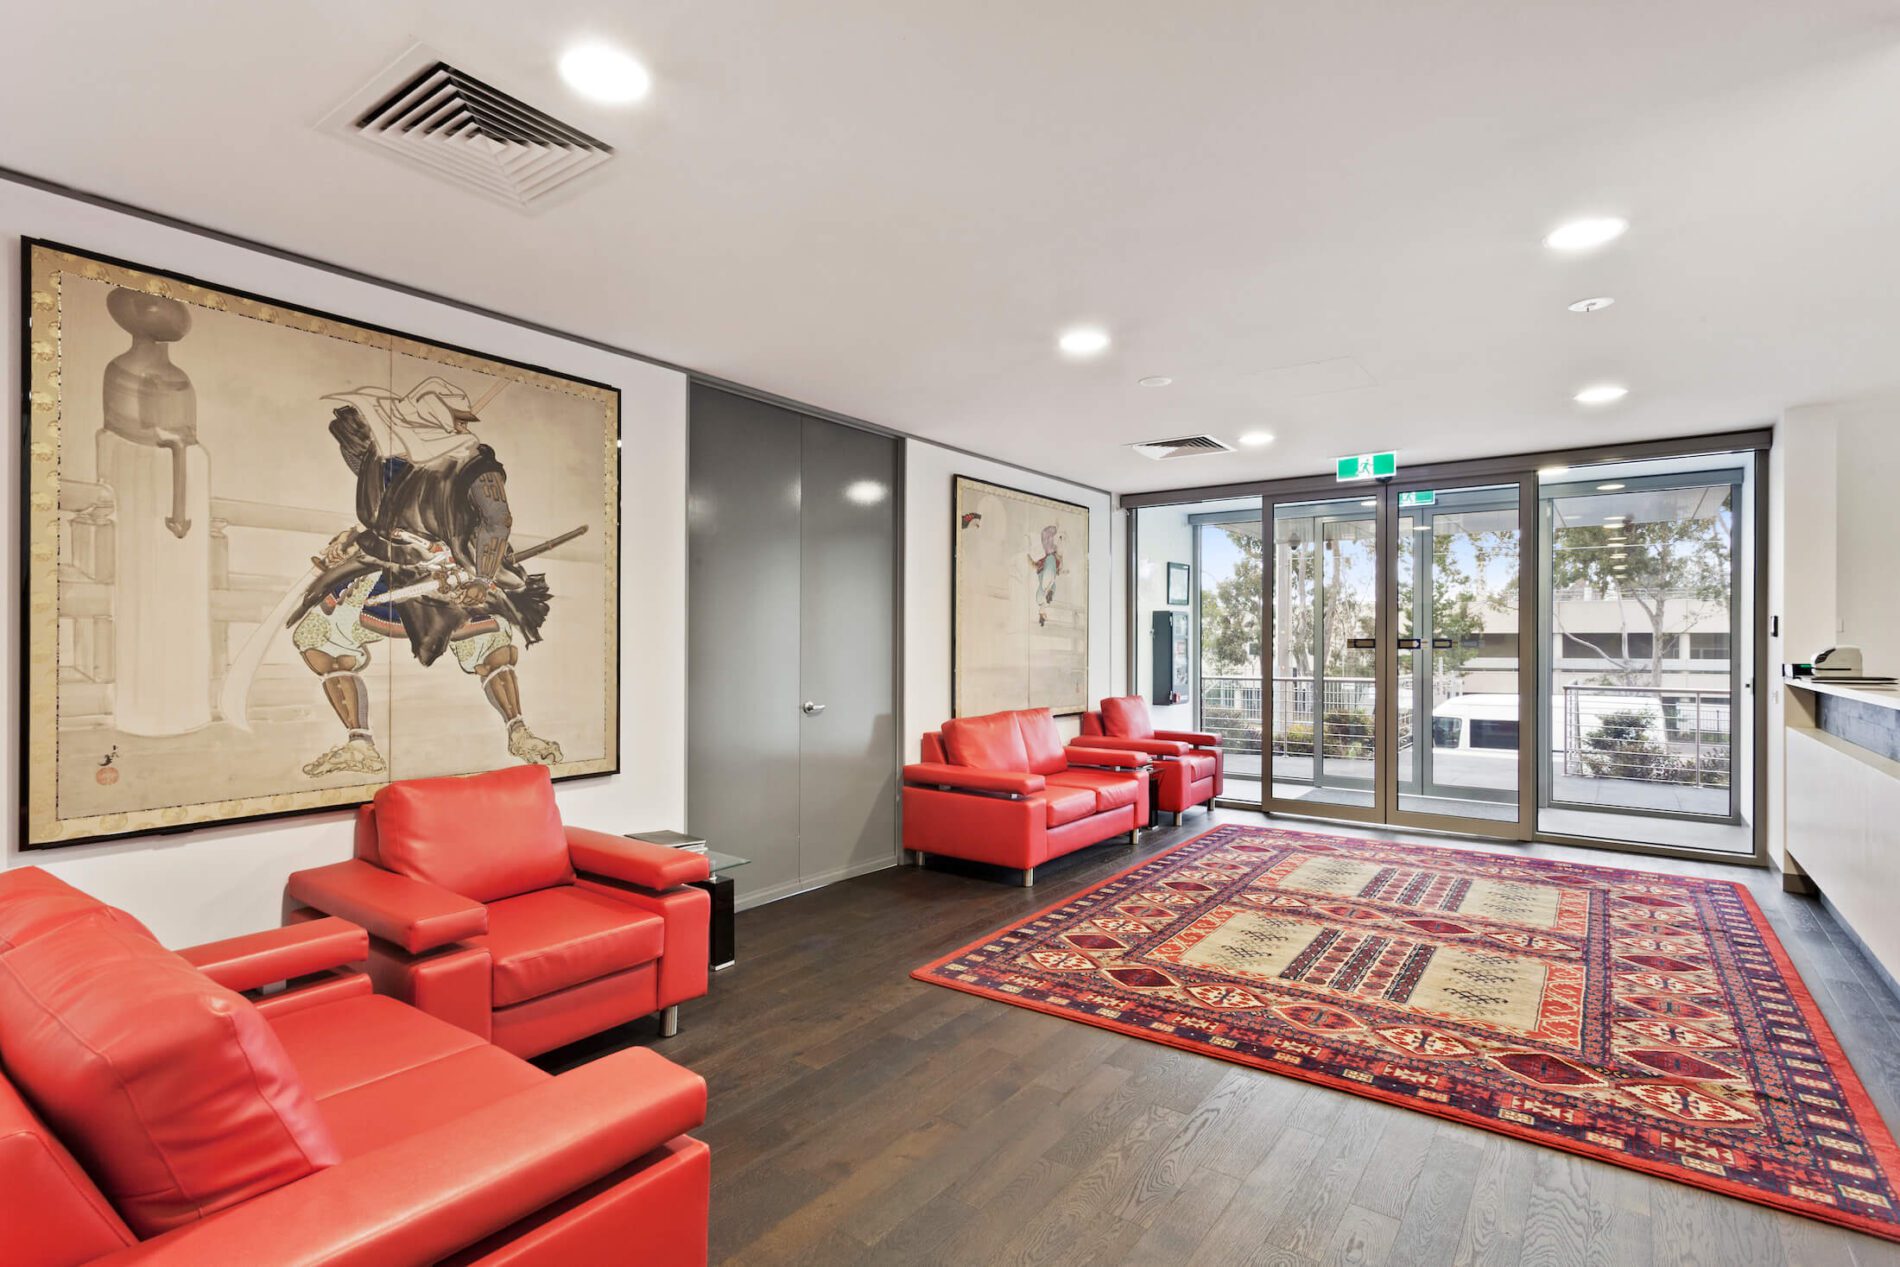 Reception to commercial space with red leather chairs and rug on floor